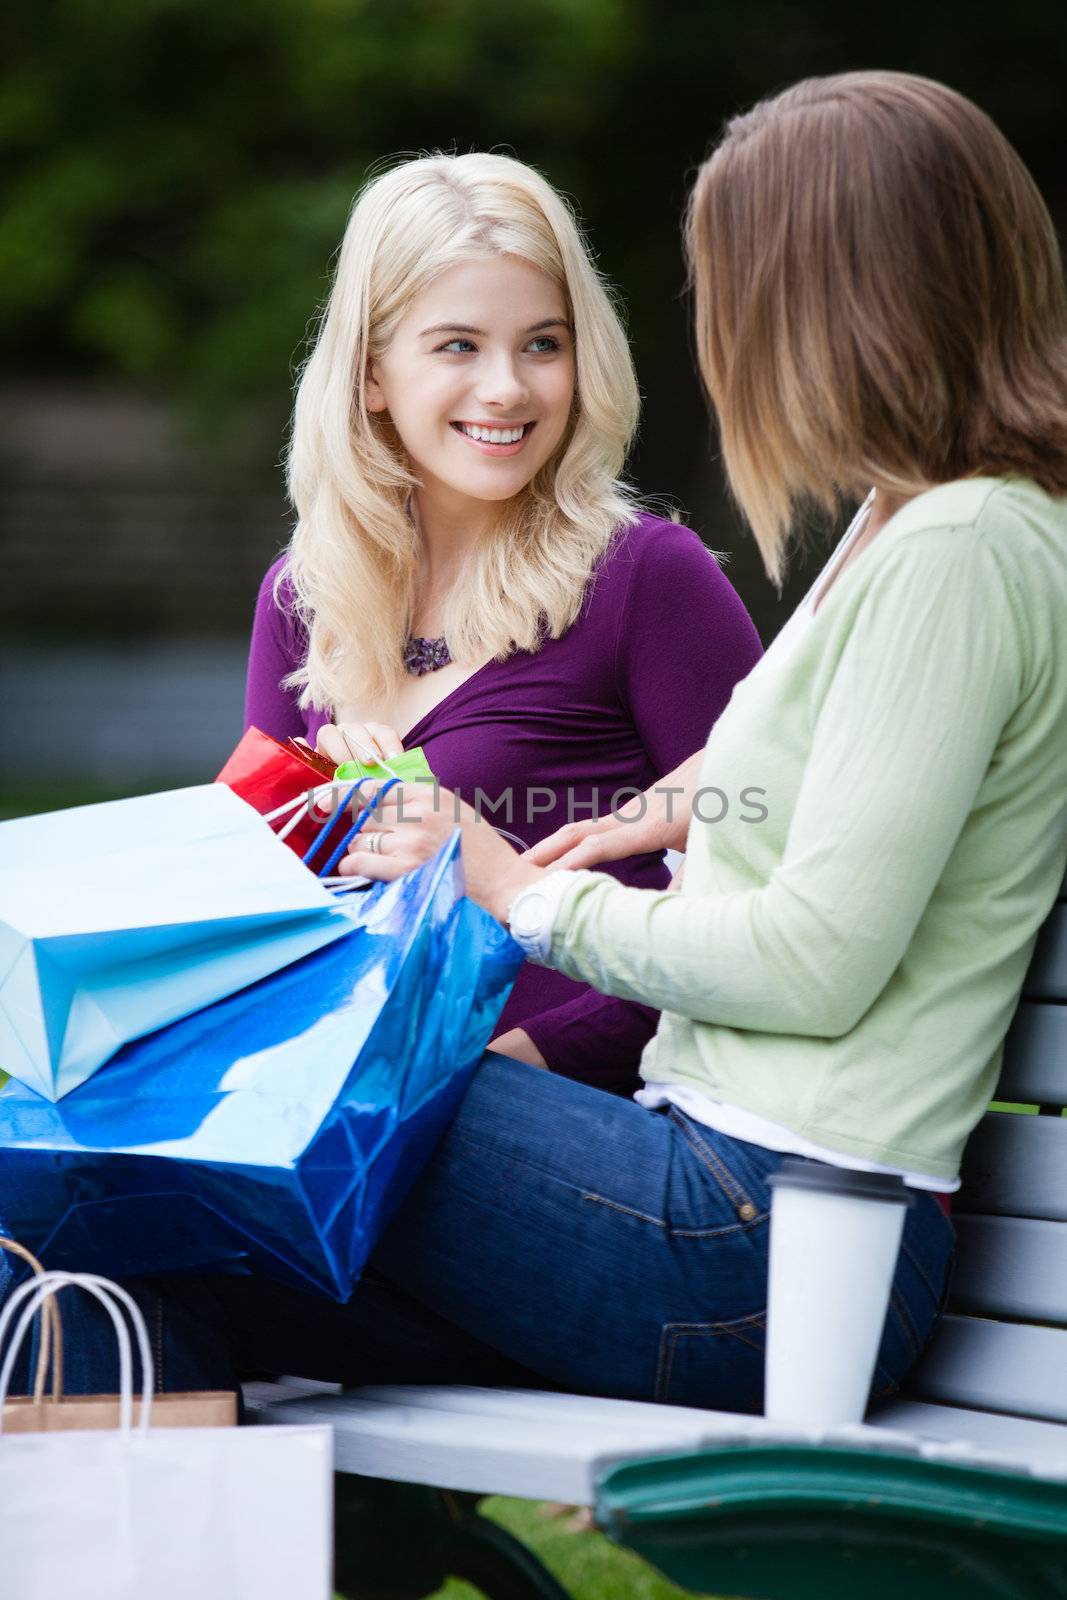 Shopping Women with Takeaway Coffee on bench.